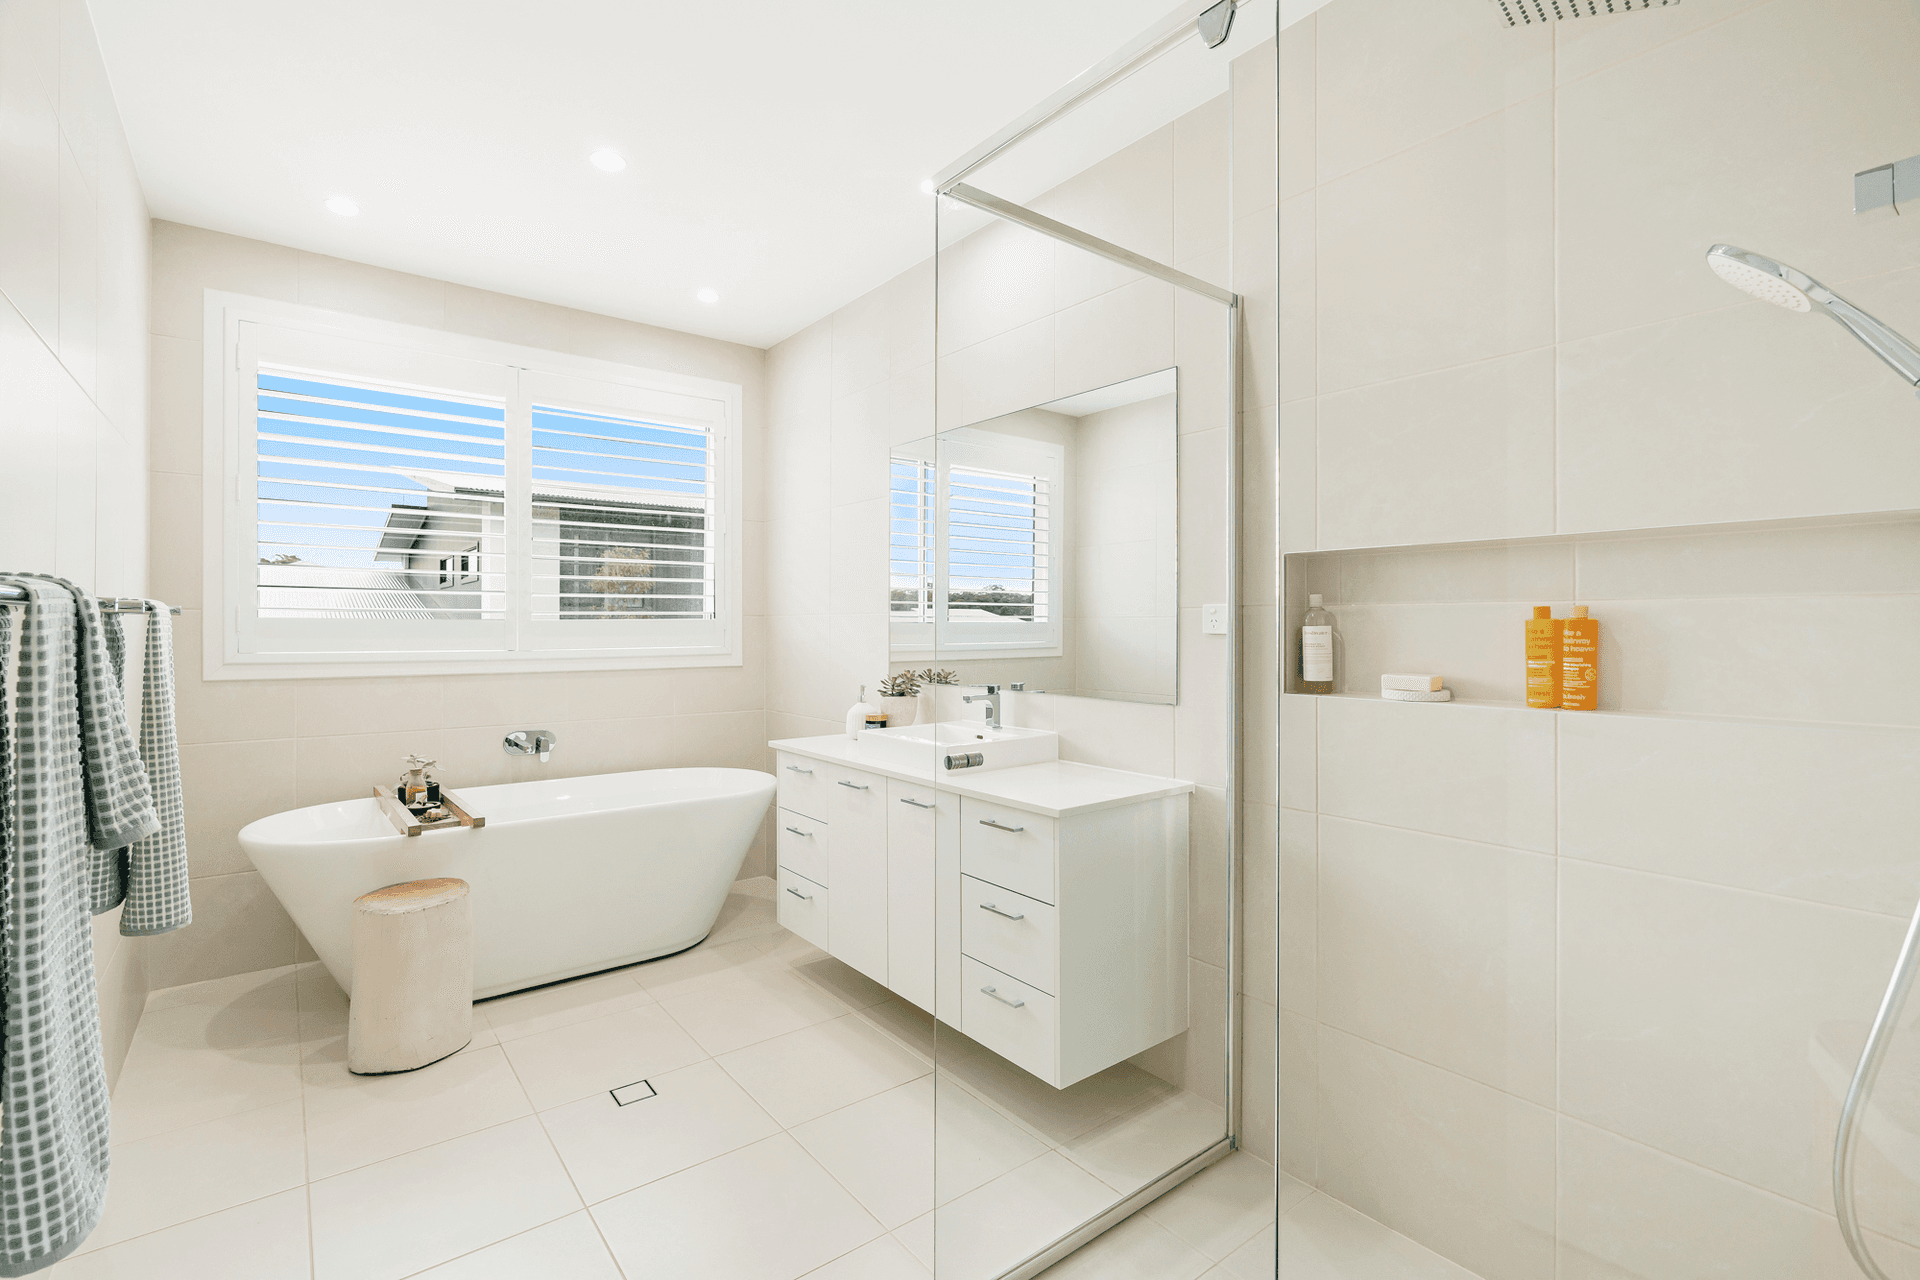 11 Timber Cutter Avenue, Terrigal, NSW 2260